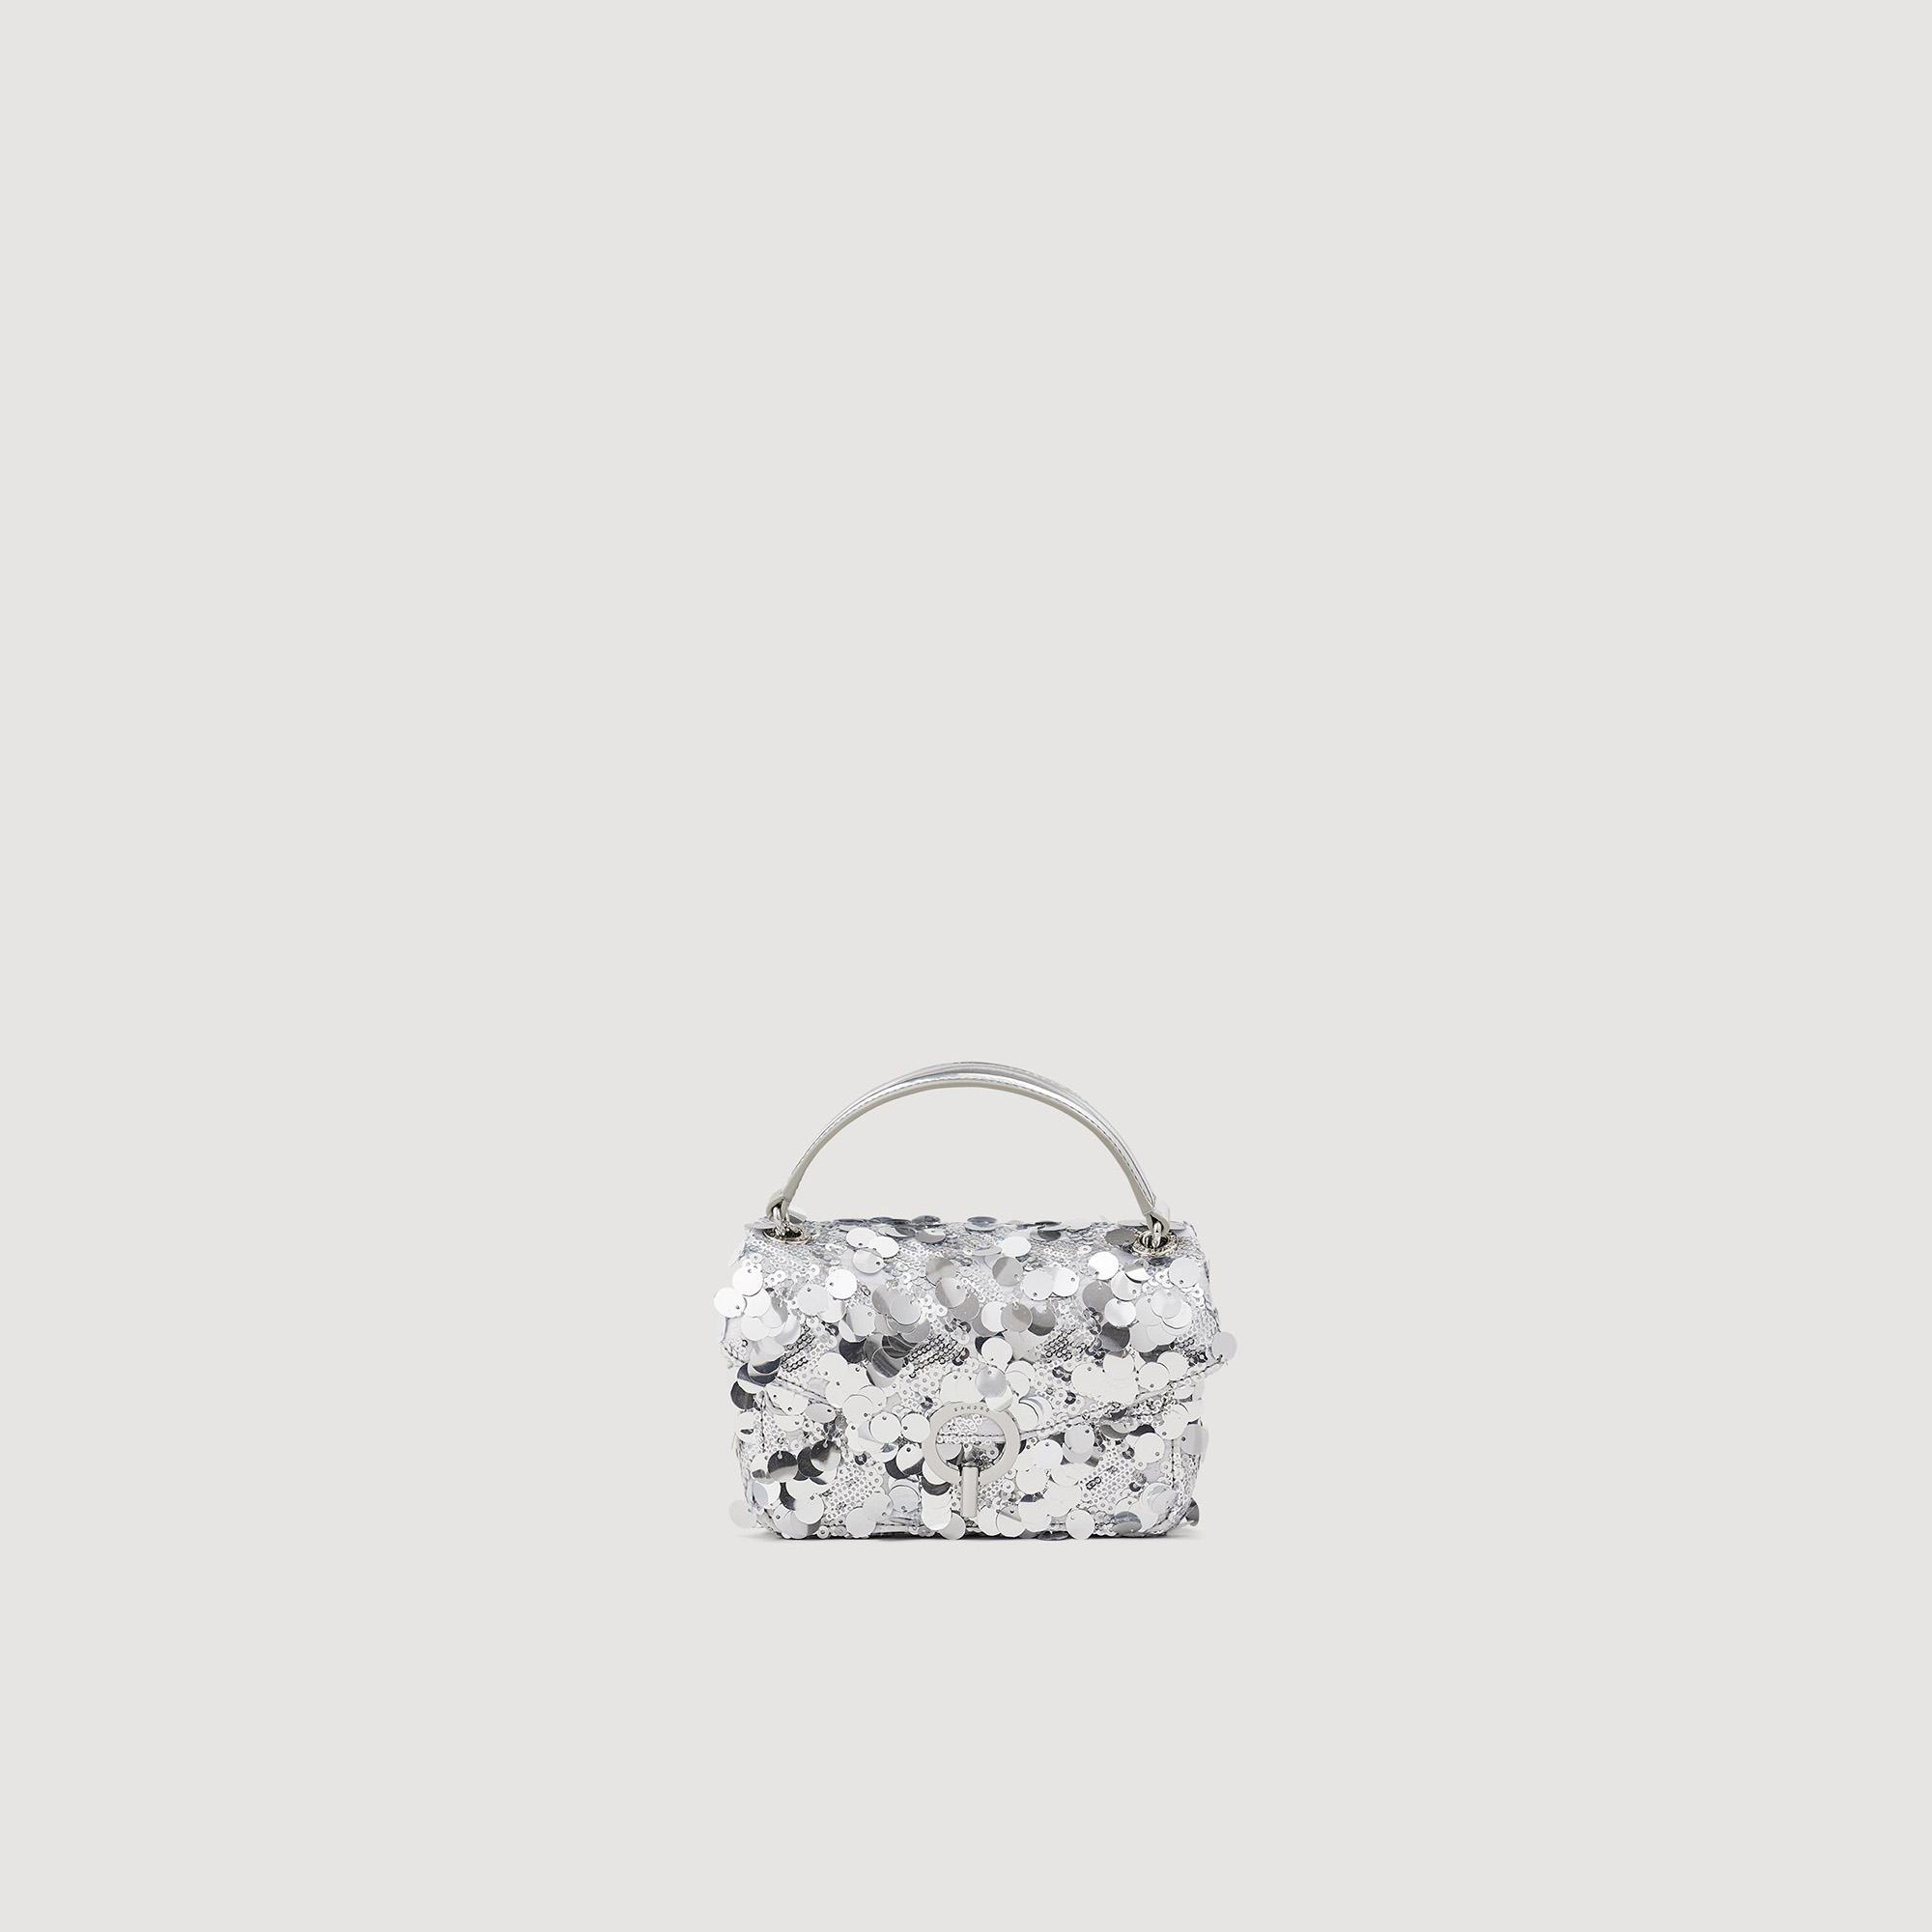 Sandro polyester Lining: The classic YZA bag now comes in a mini version embellished with the maximum number of sequins and dots